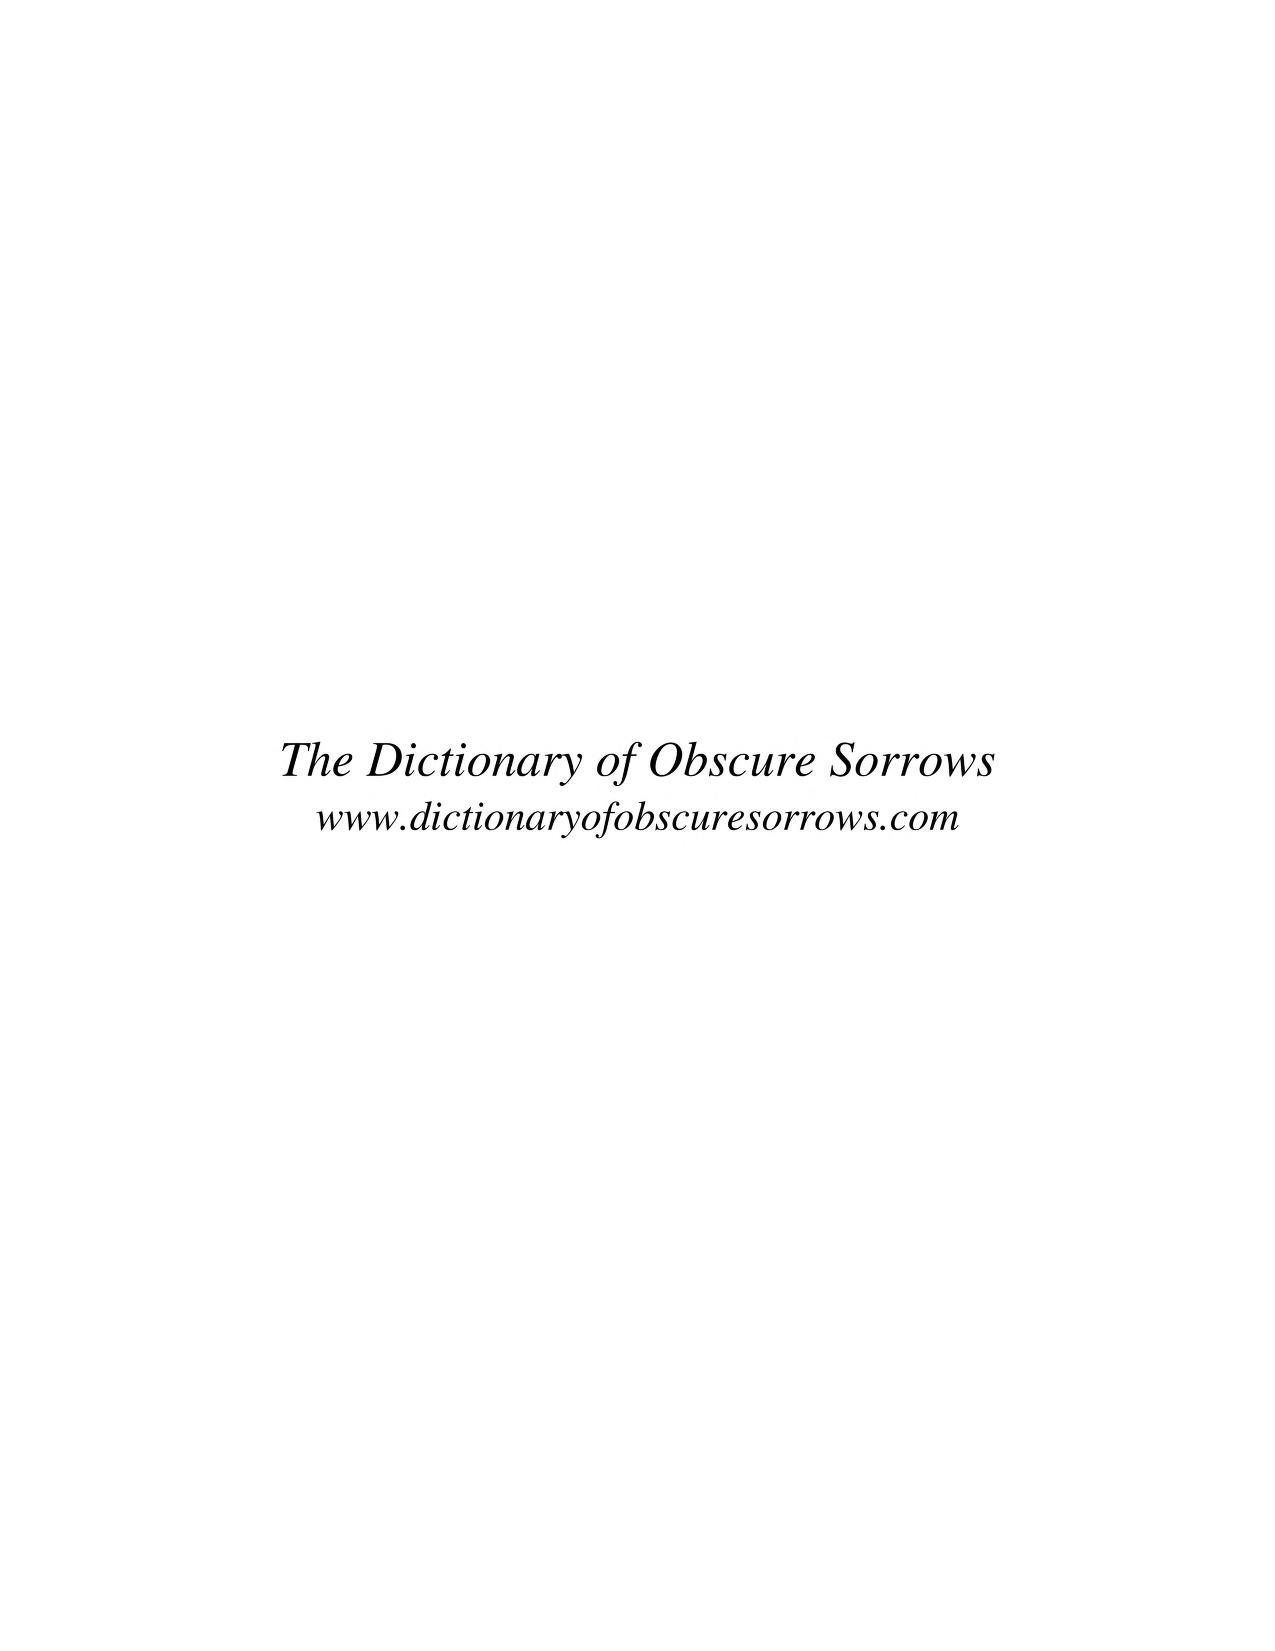 the dictionary of obscure sorrows book pdf free download